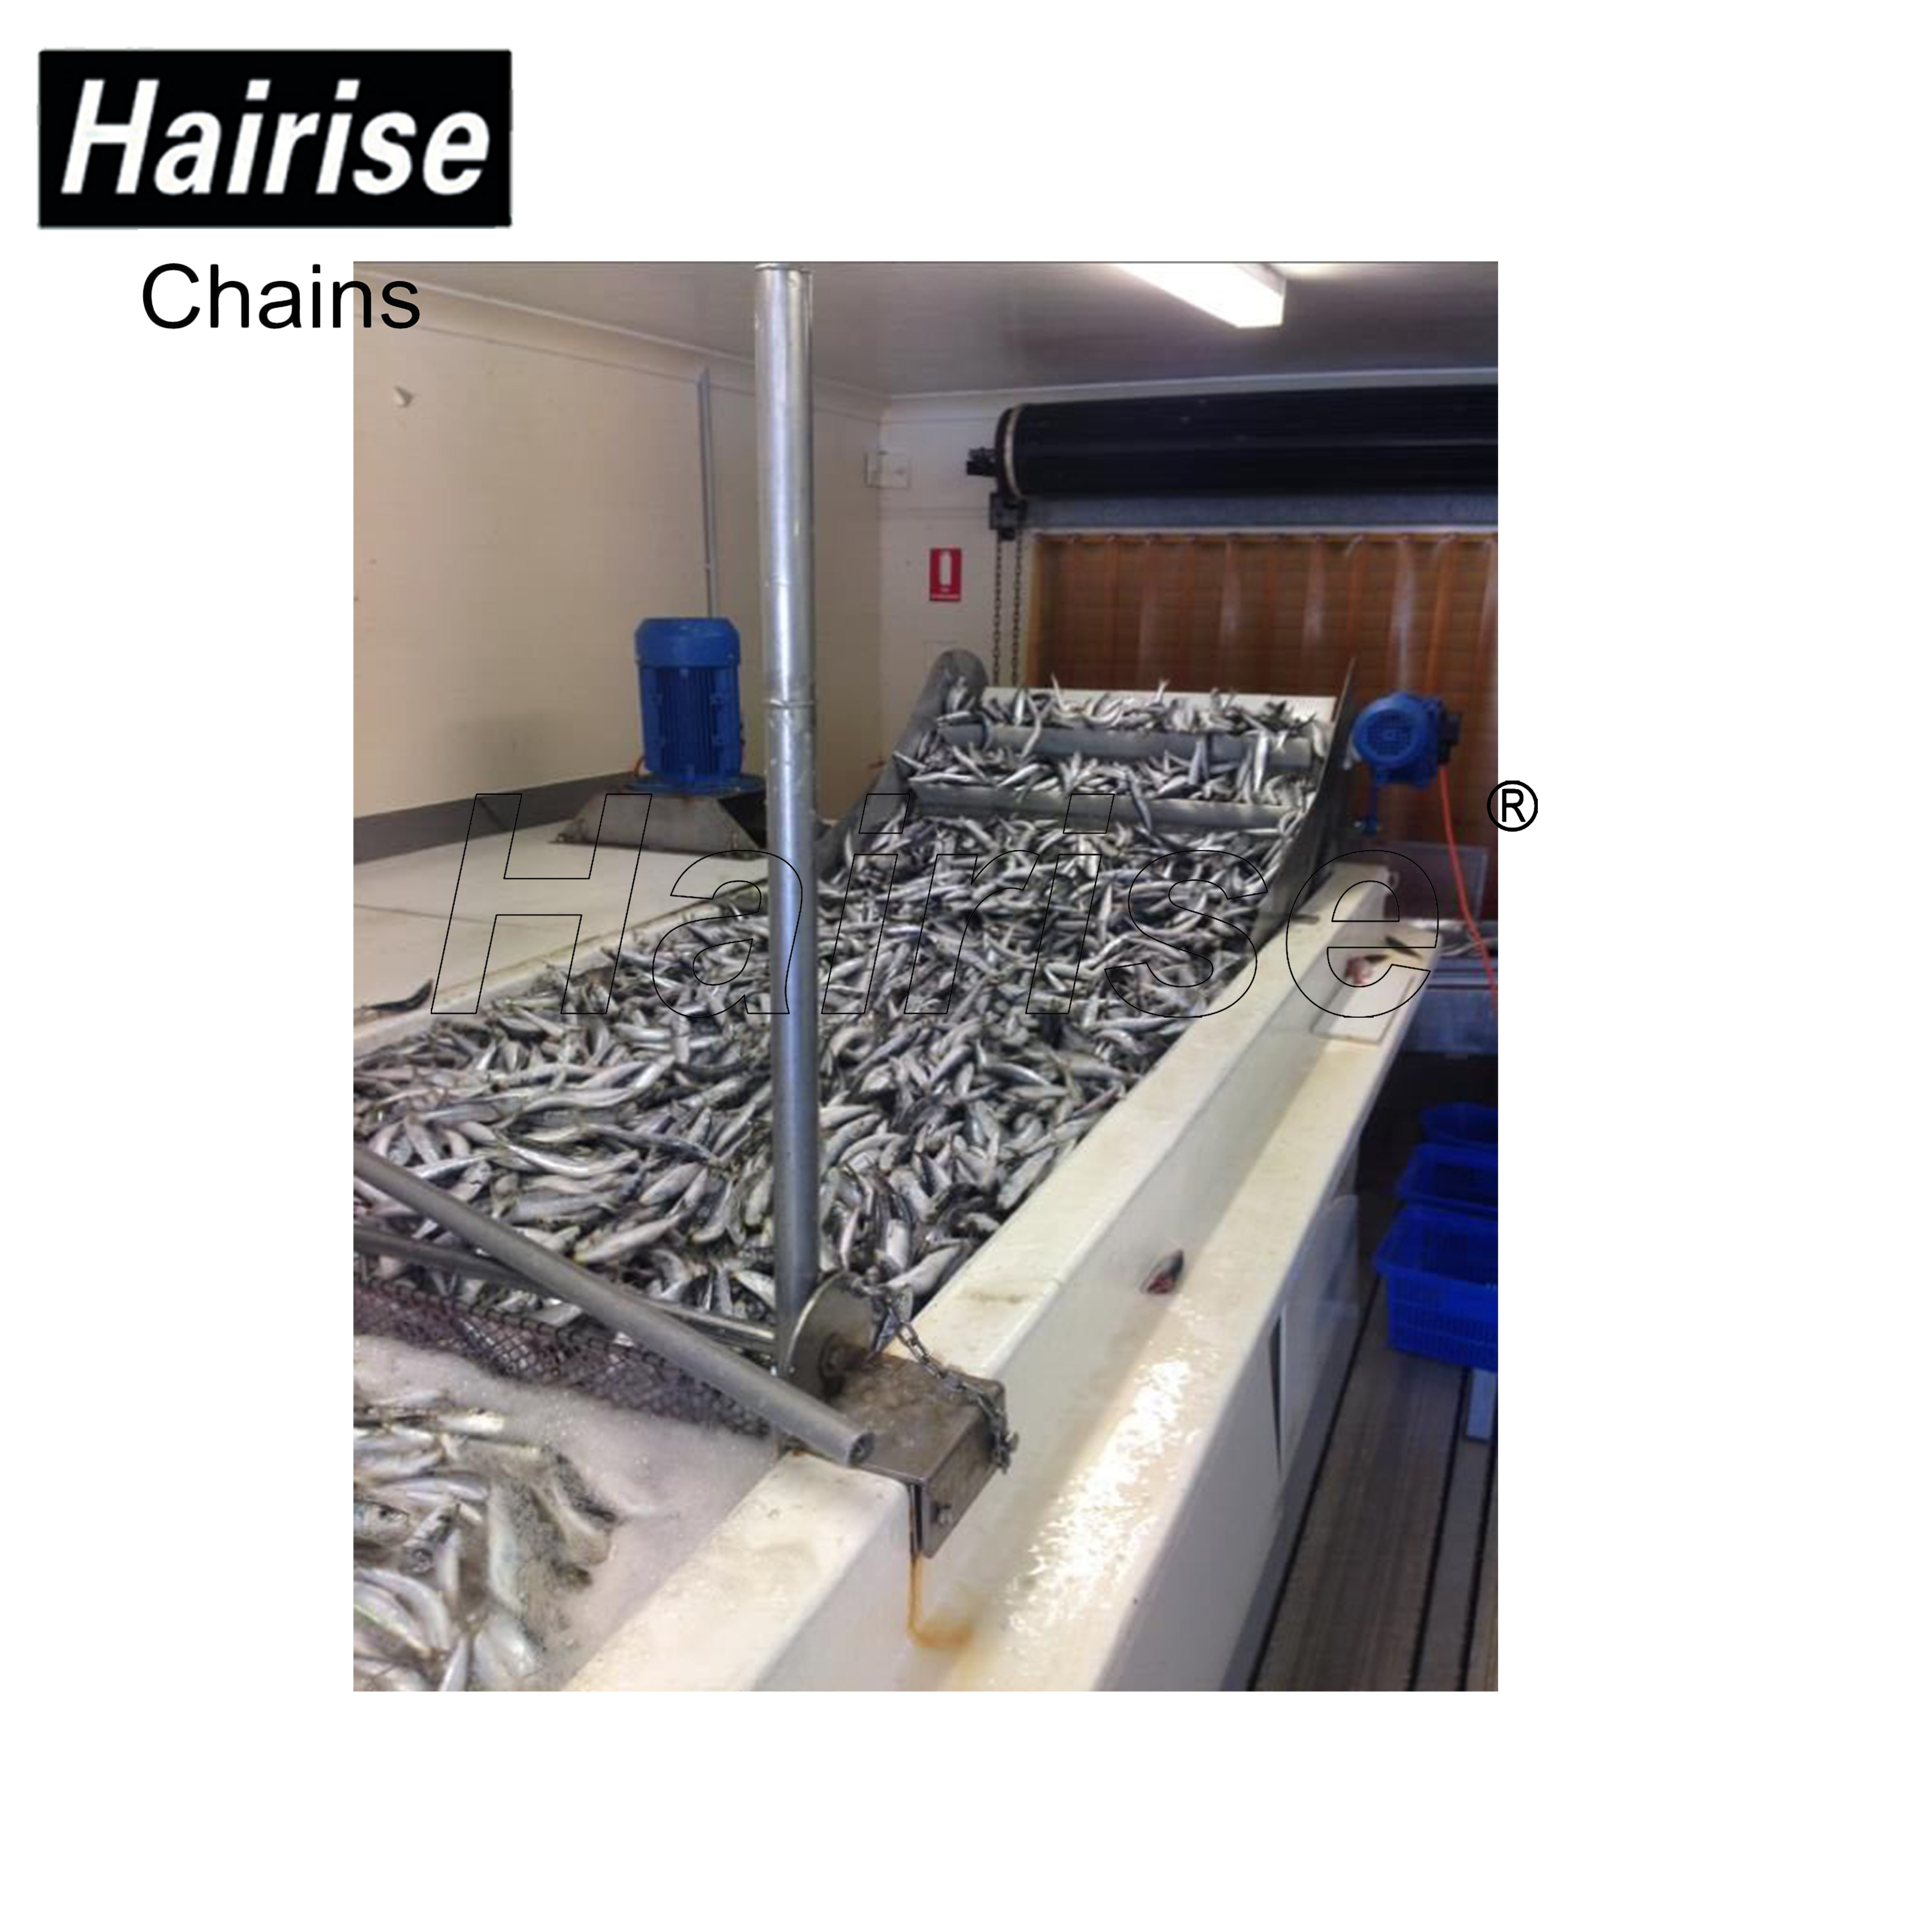 Hairise conveyor system for cooling fish industry